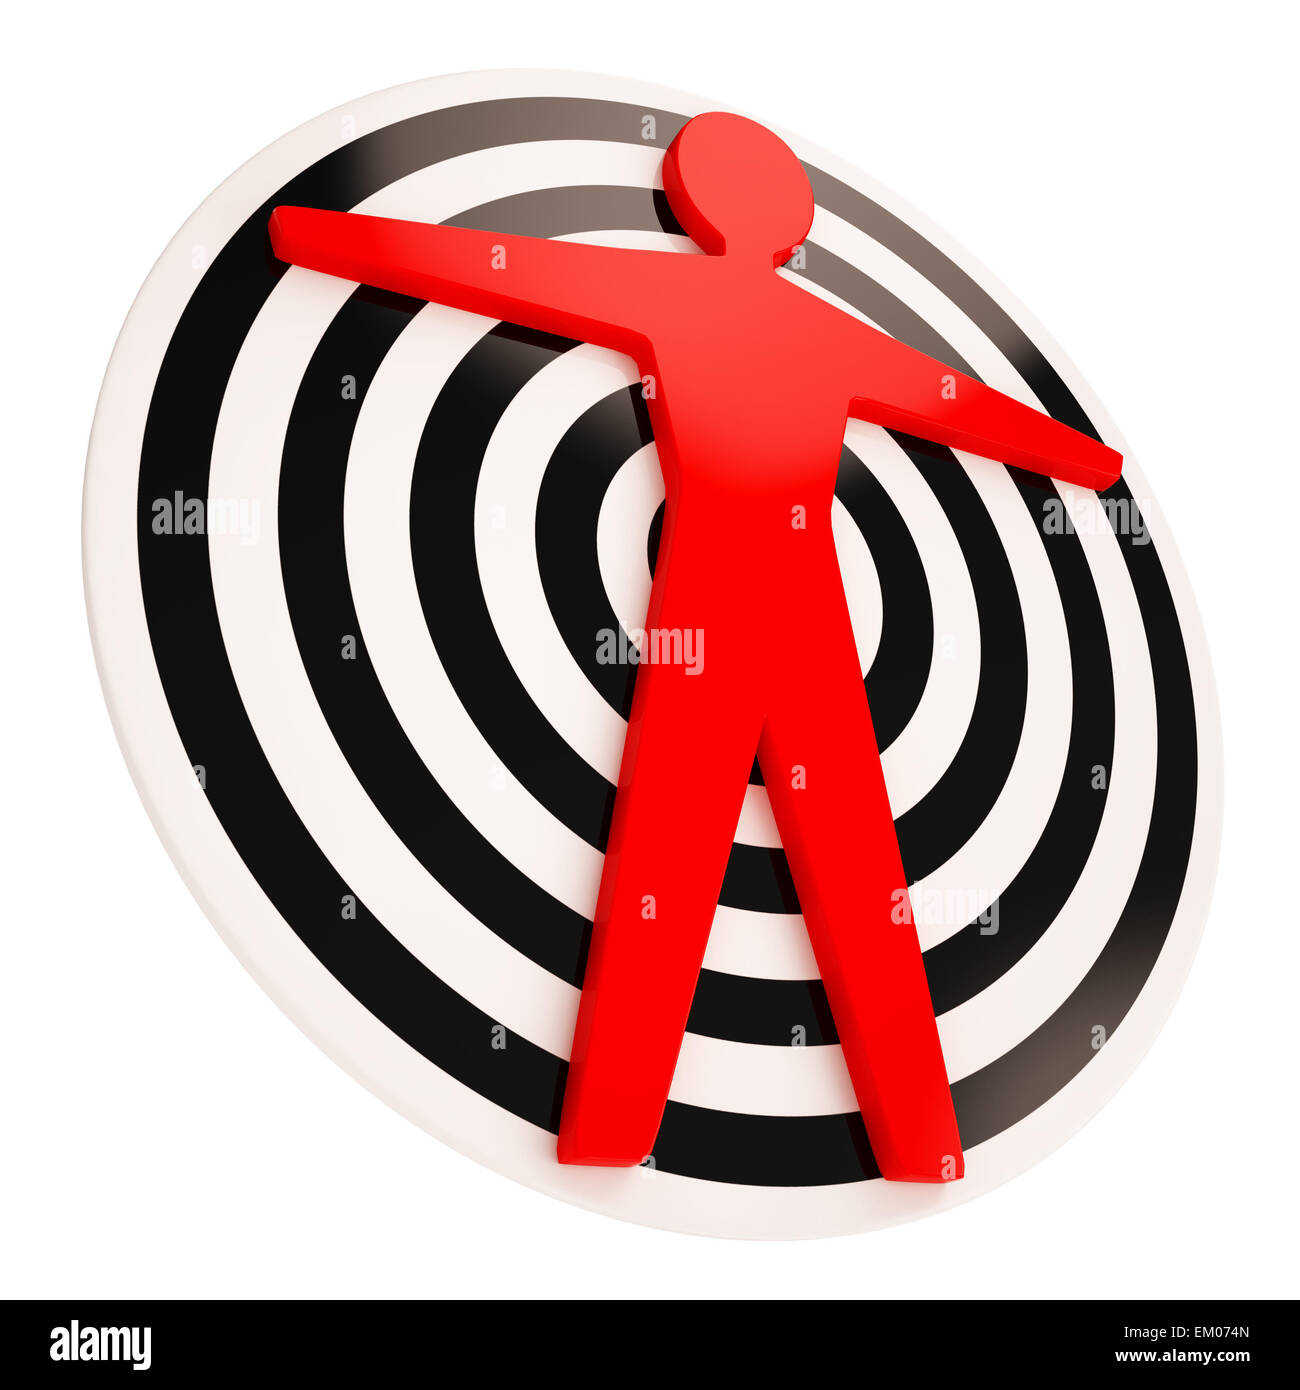 Human Target Shows Object As Man Stock Photo